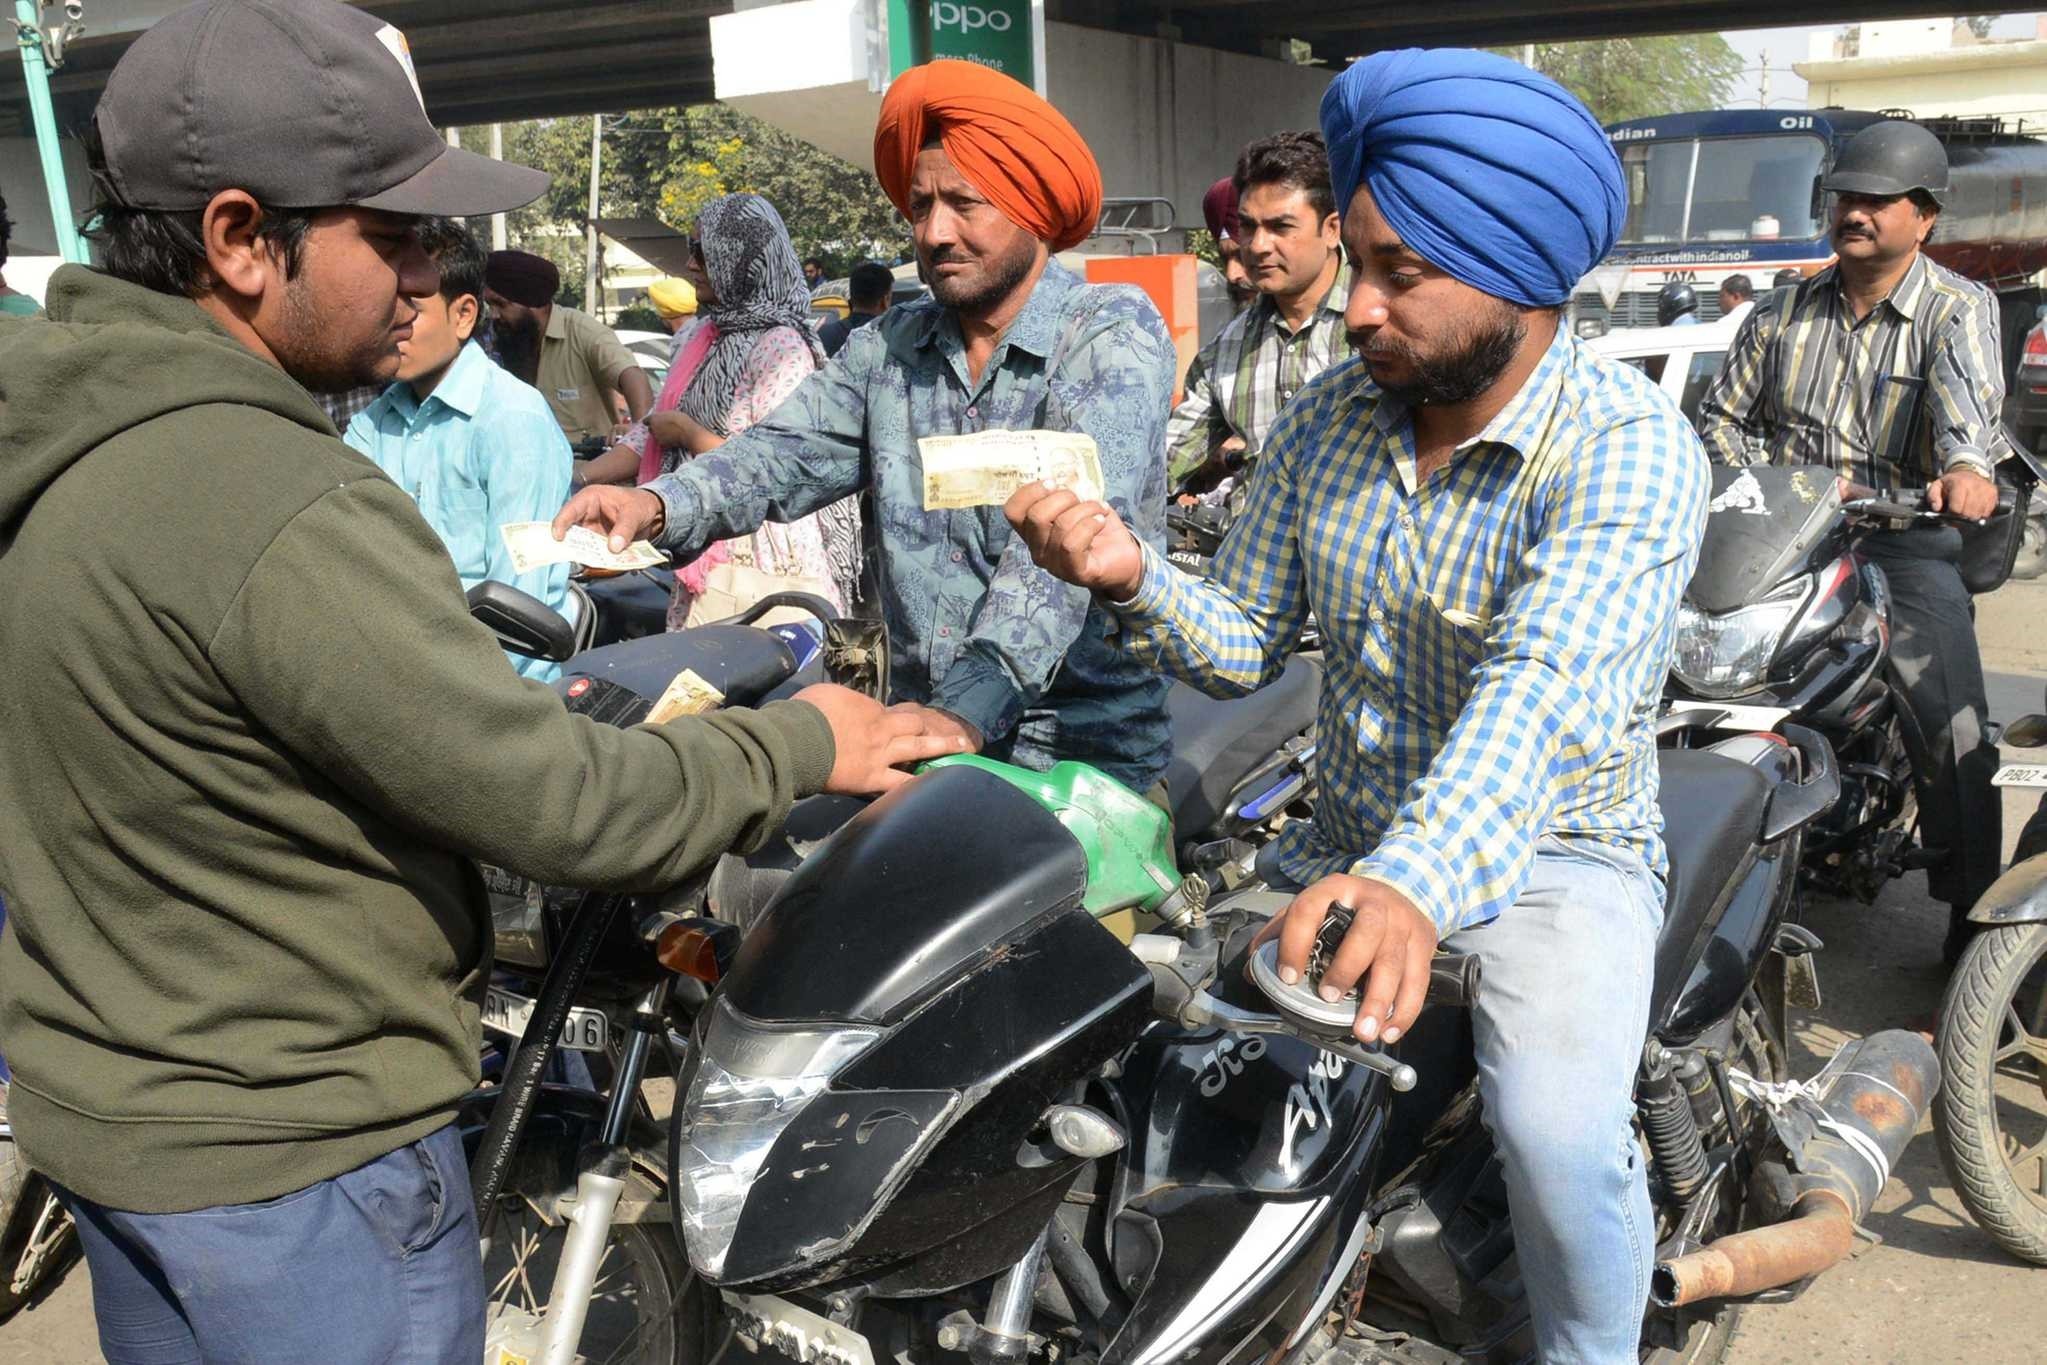 Indian motorists pay with 500 rupee notes at a fuel station in Amritsar. ATMs were closed and many are likely to remain shut today as banks prepare for the flood of people seeking to exchange larger banknotes.